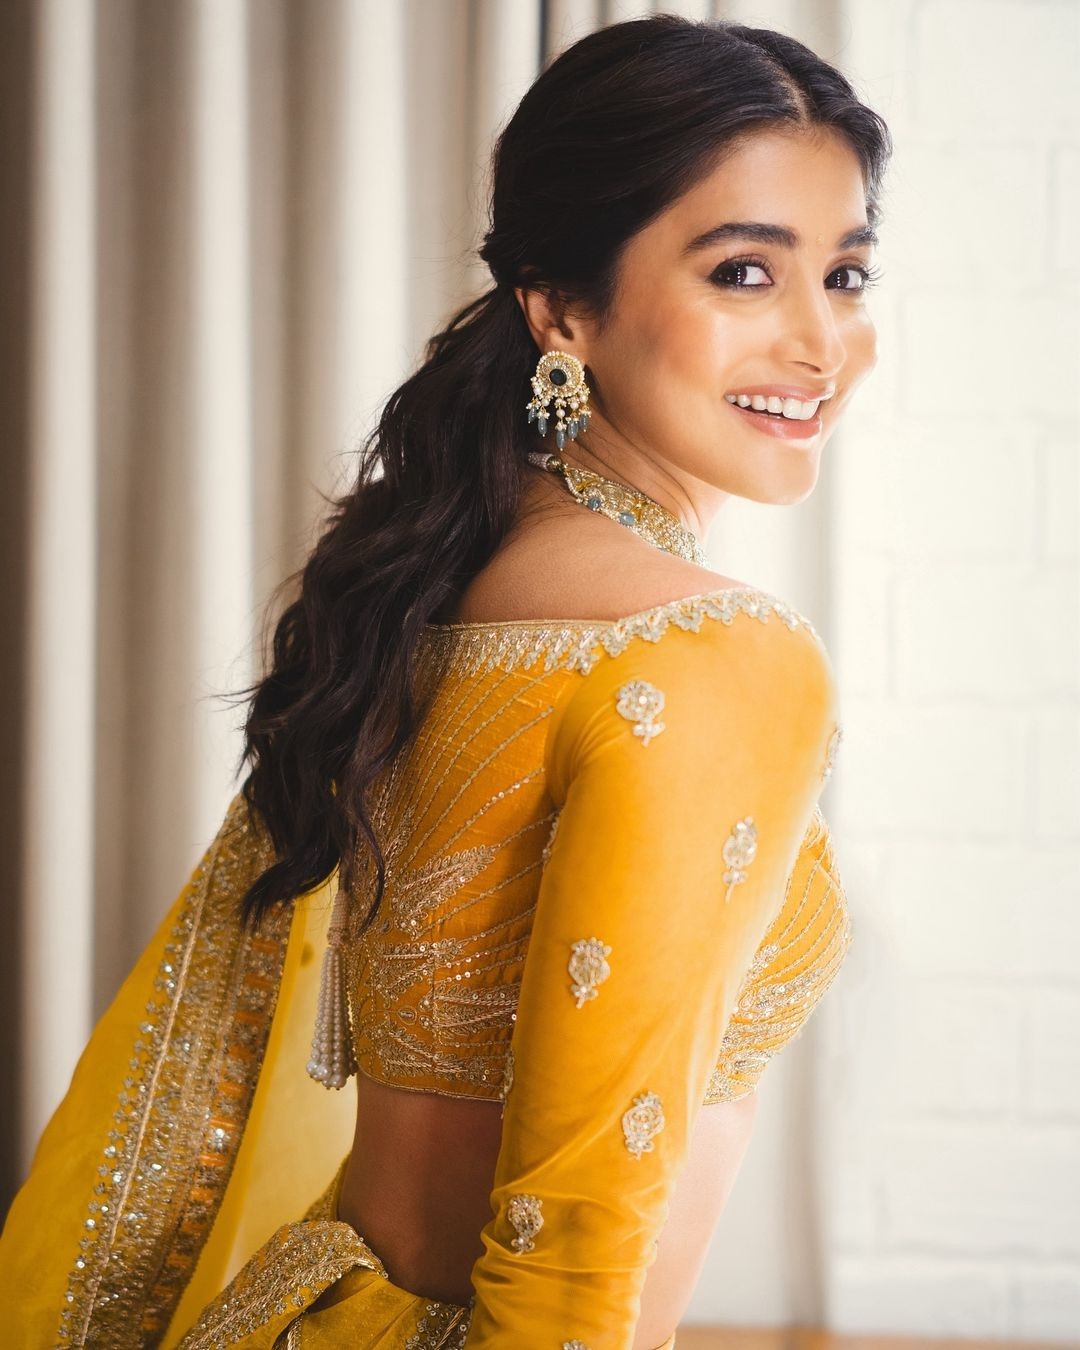 Actress Pooja Hegde Traditional Looks in Yellow Dress